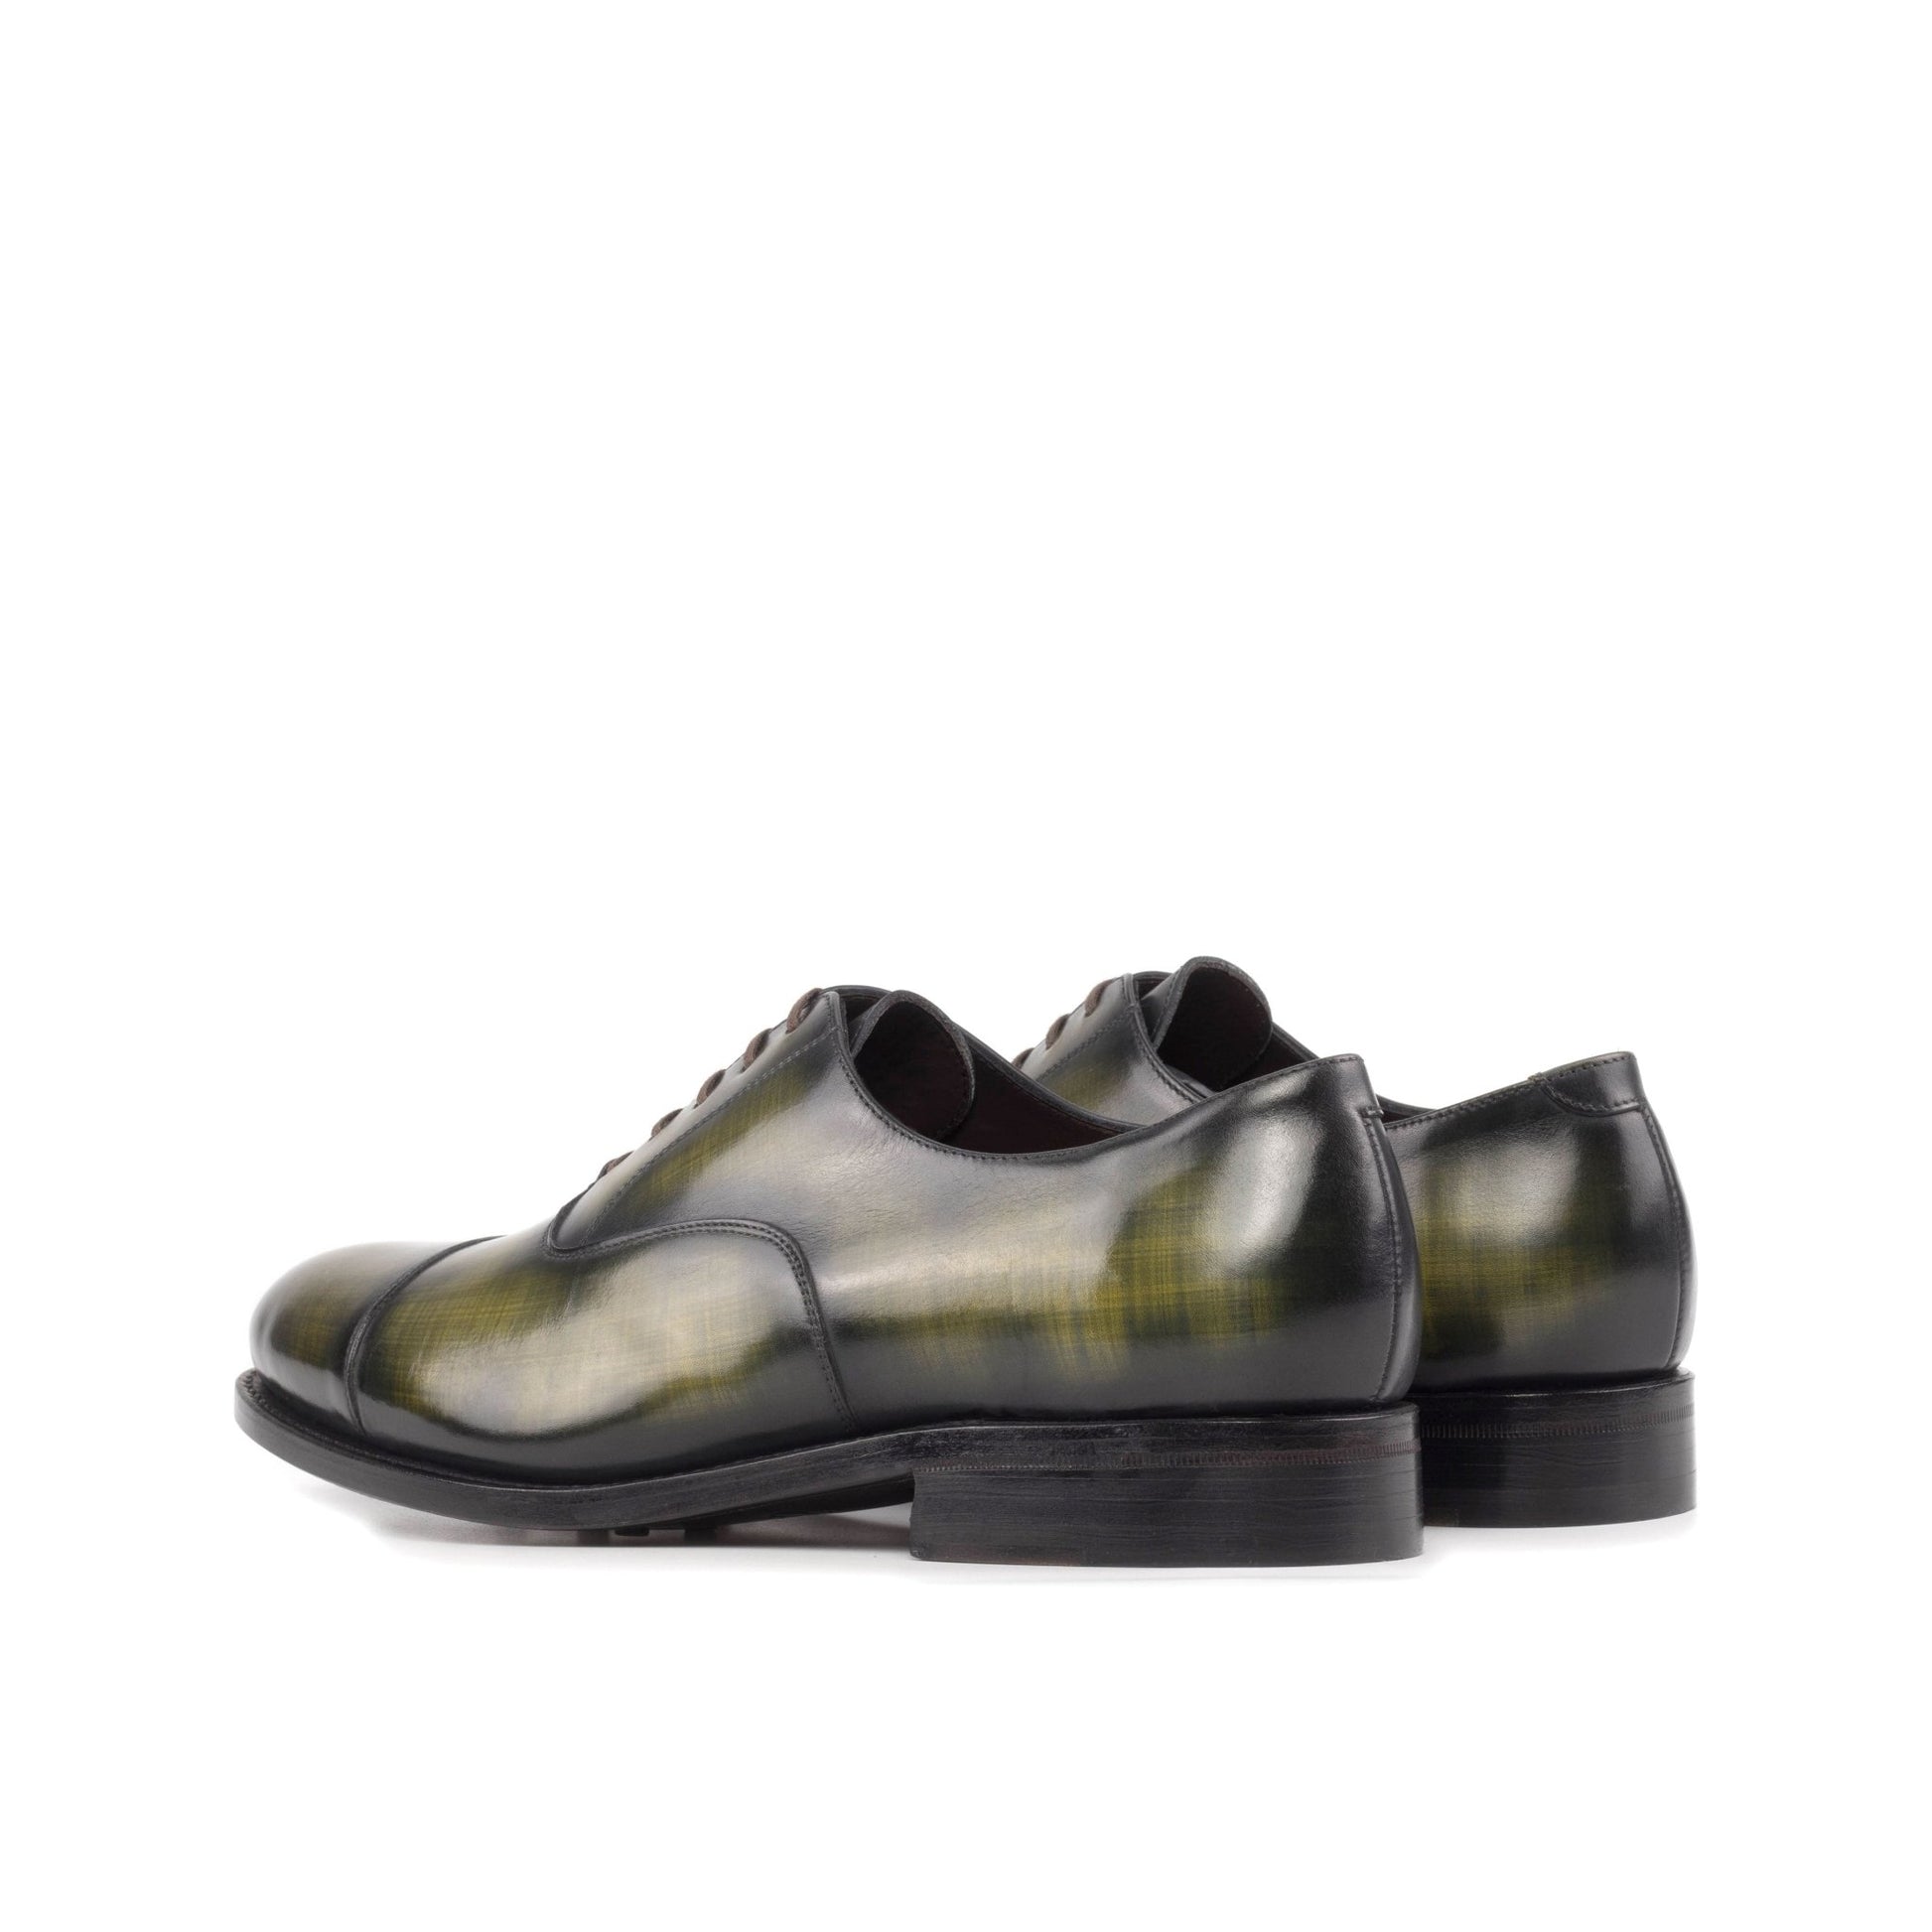 Cap Toe Oxford in Khaki Patina - Zatorres | Free Shipping on orders over $200